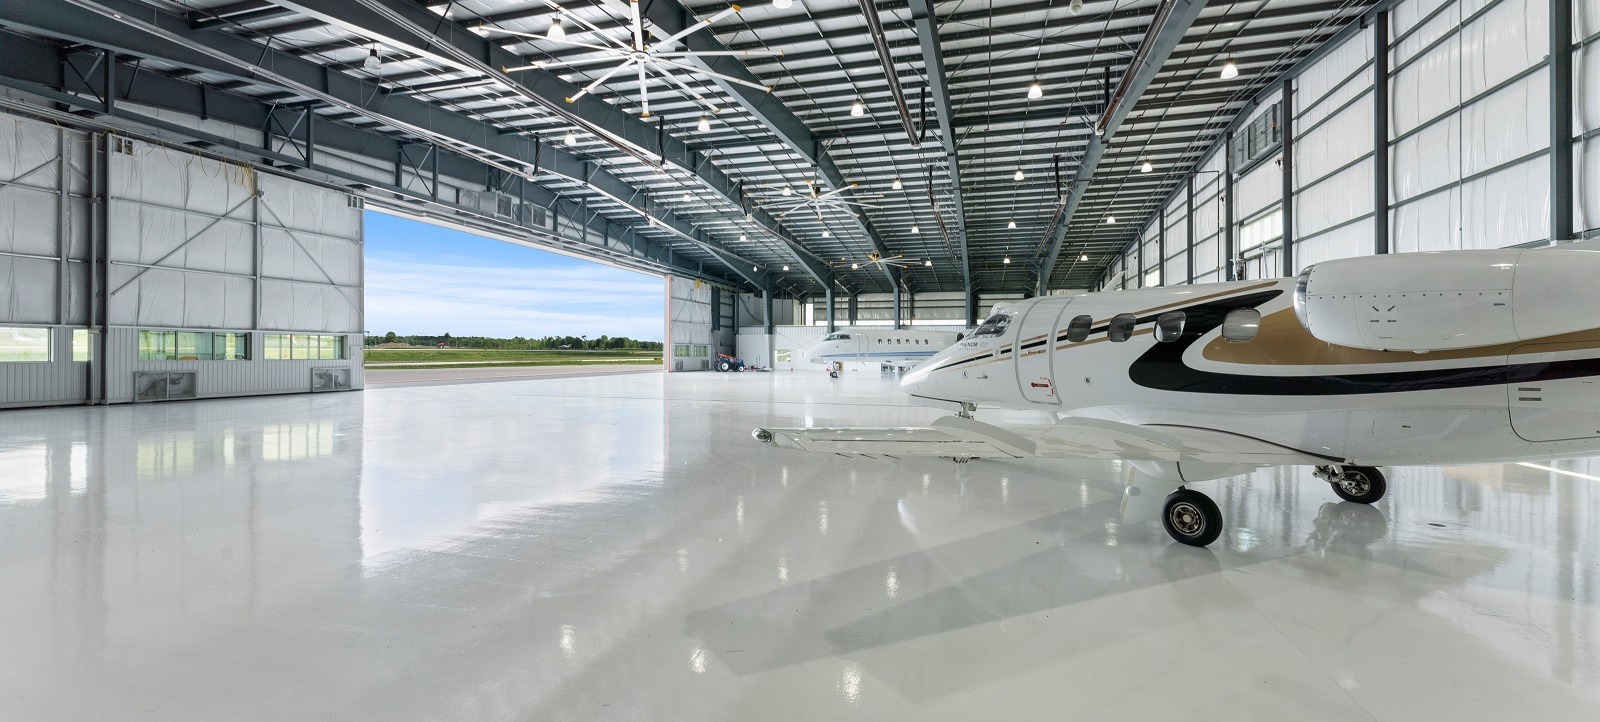 Chartright opens a new FBO at CYLS